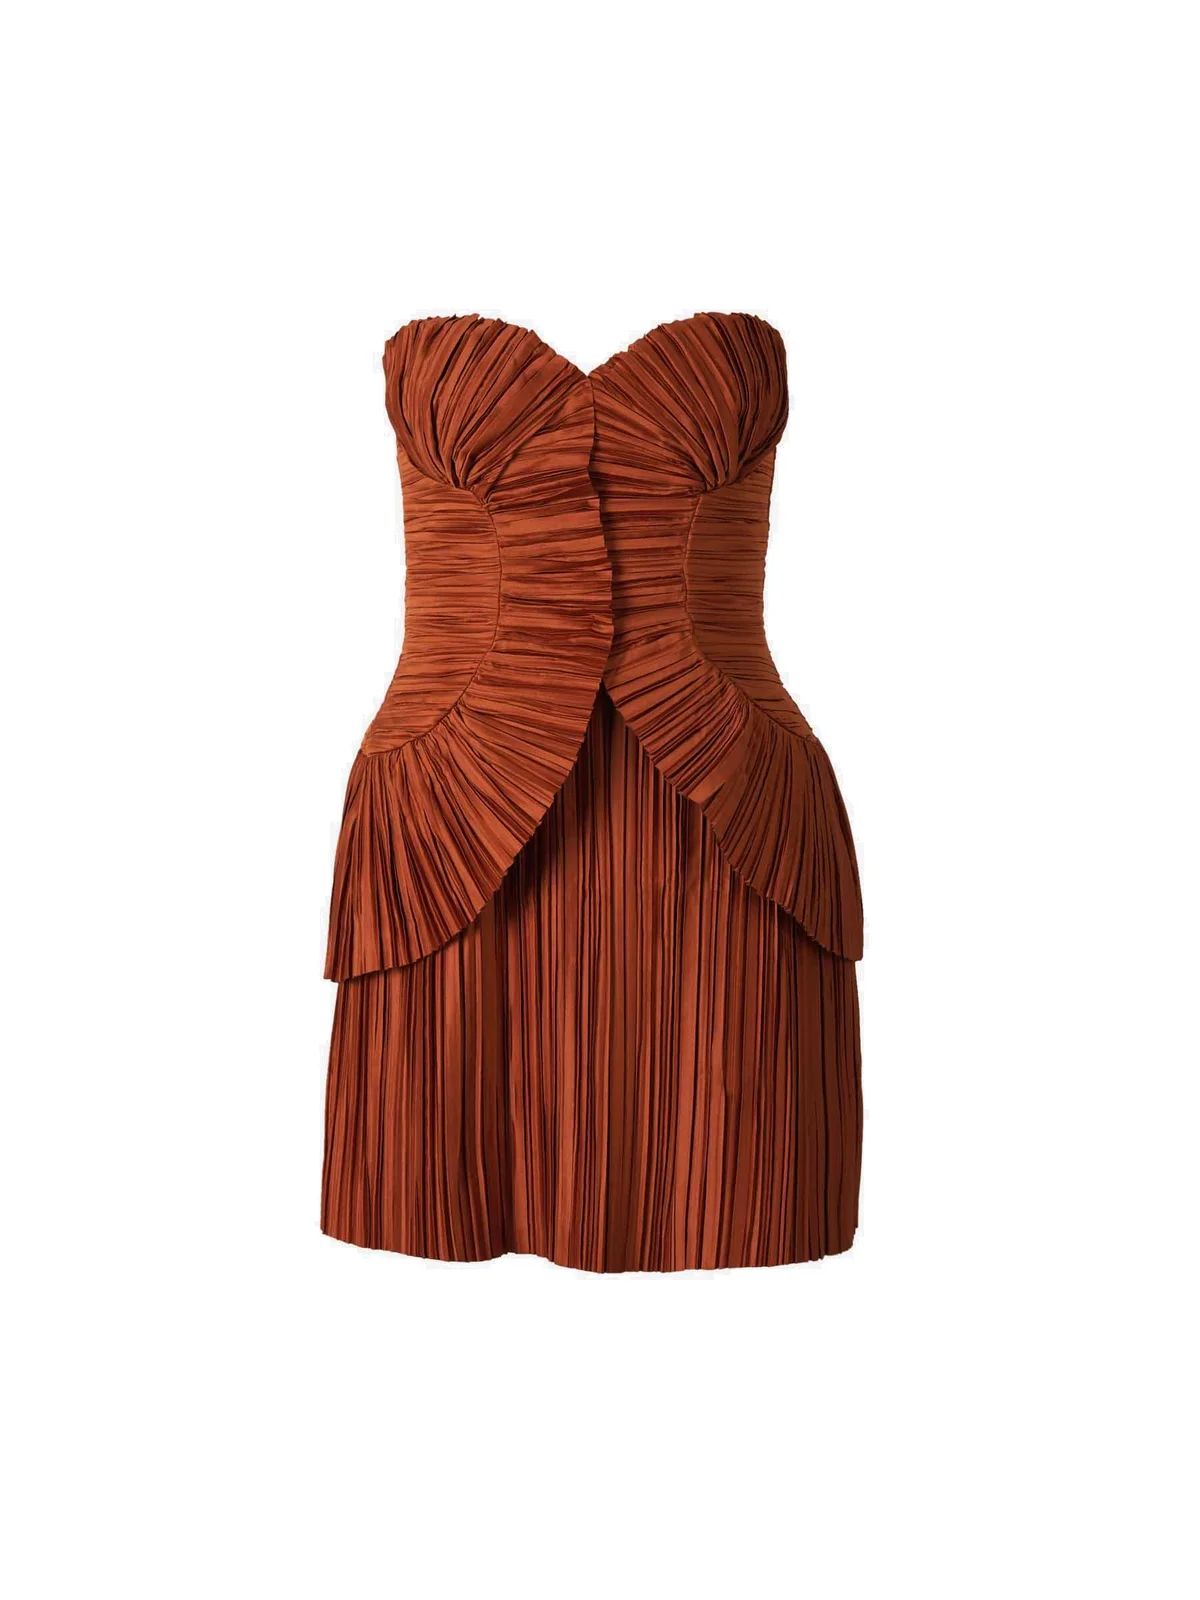 Cult Gaia Charlique Pleat Detailed Strapless Dress | Cettire Global